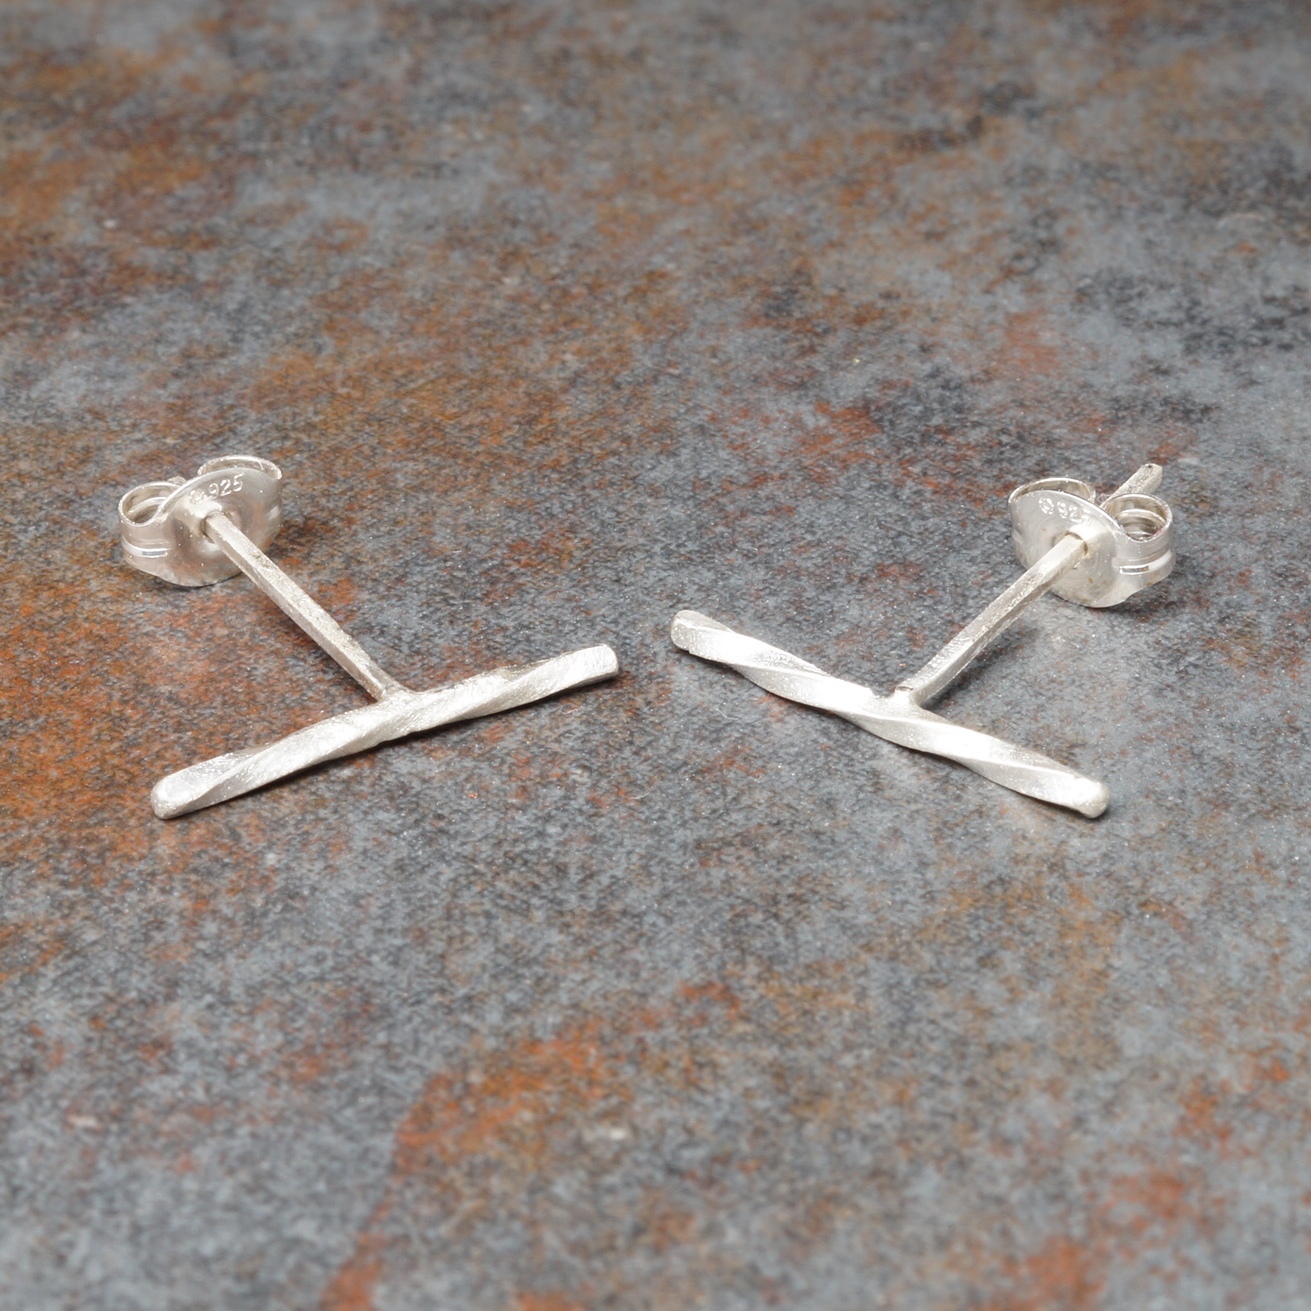 Handmade small sterling silver twisted bar studs